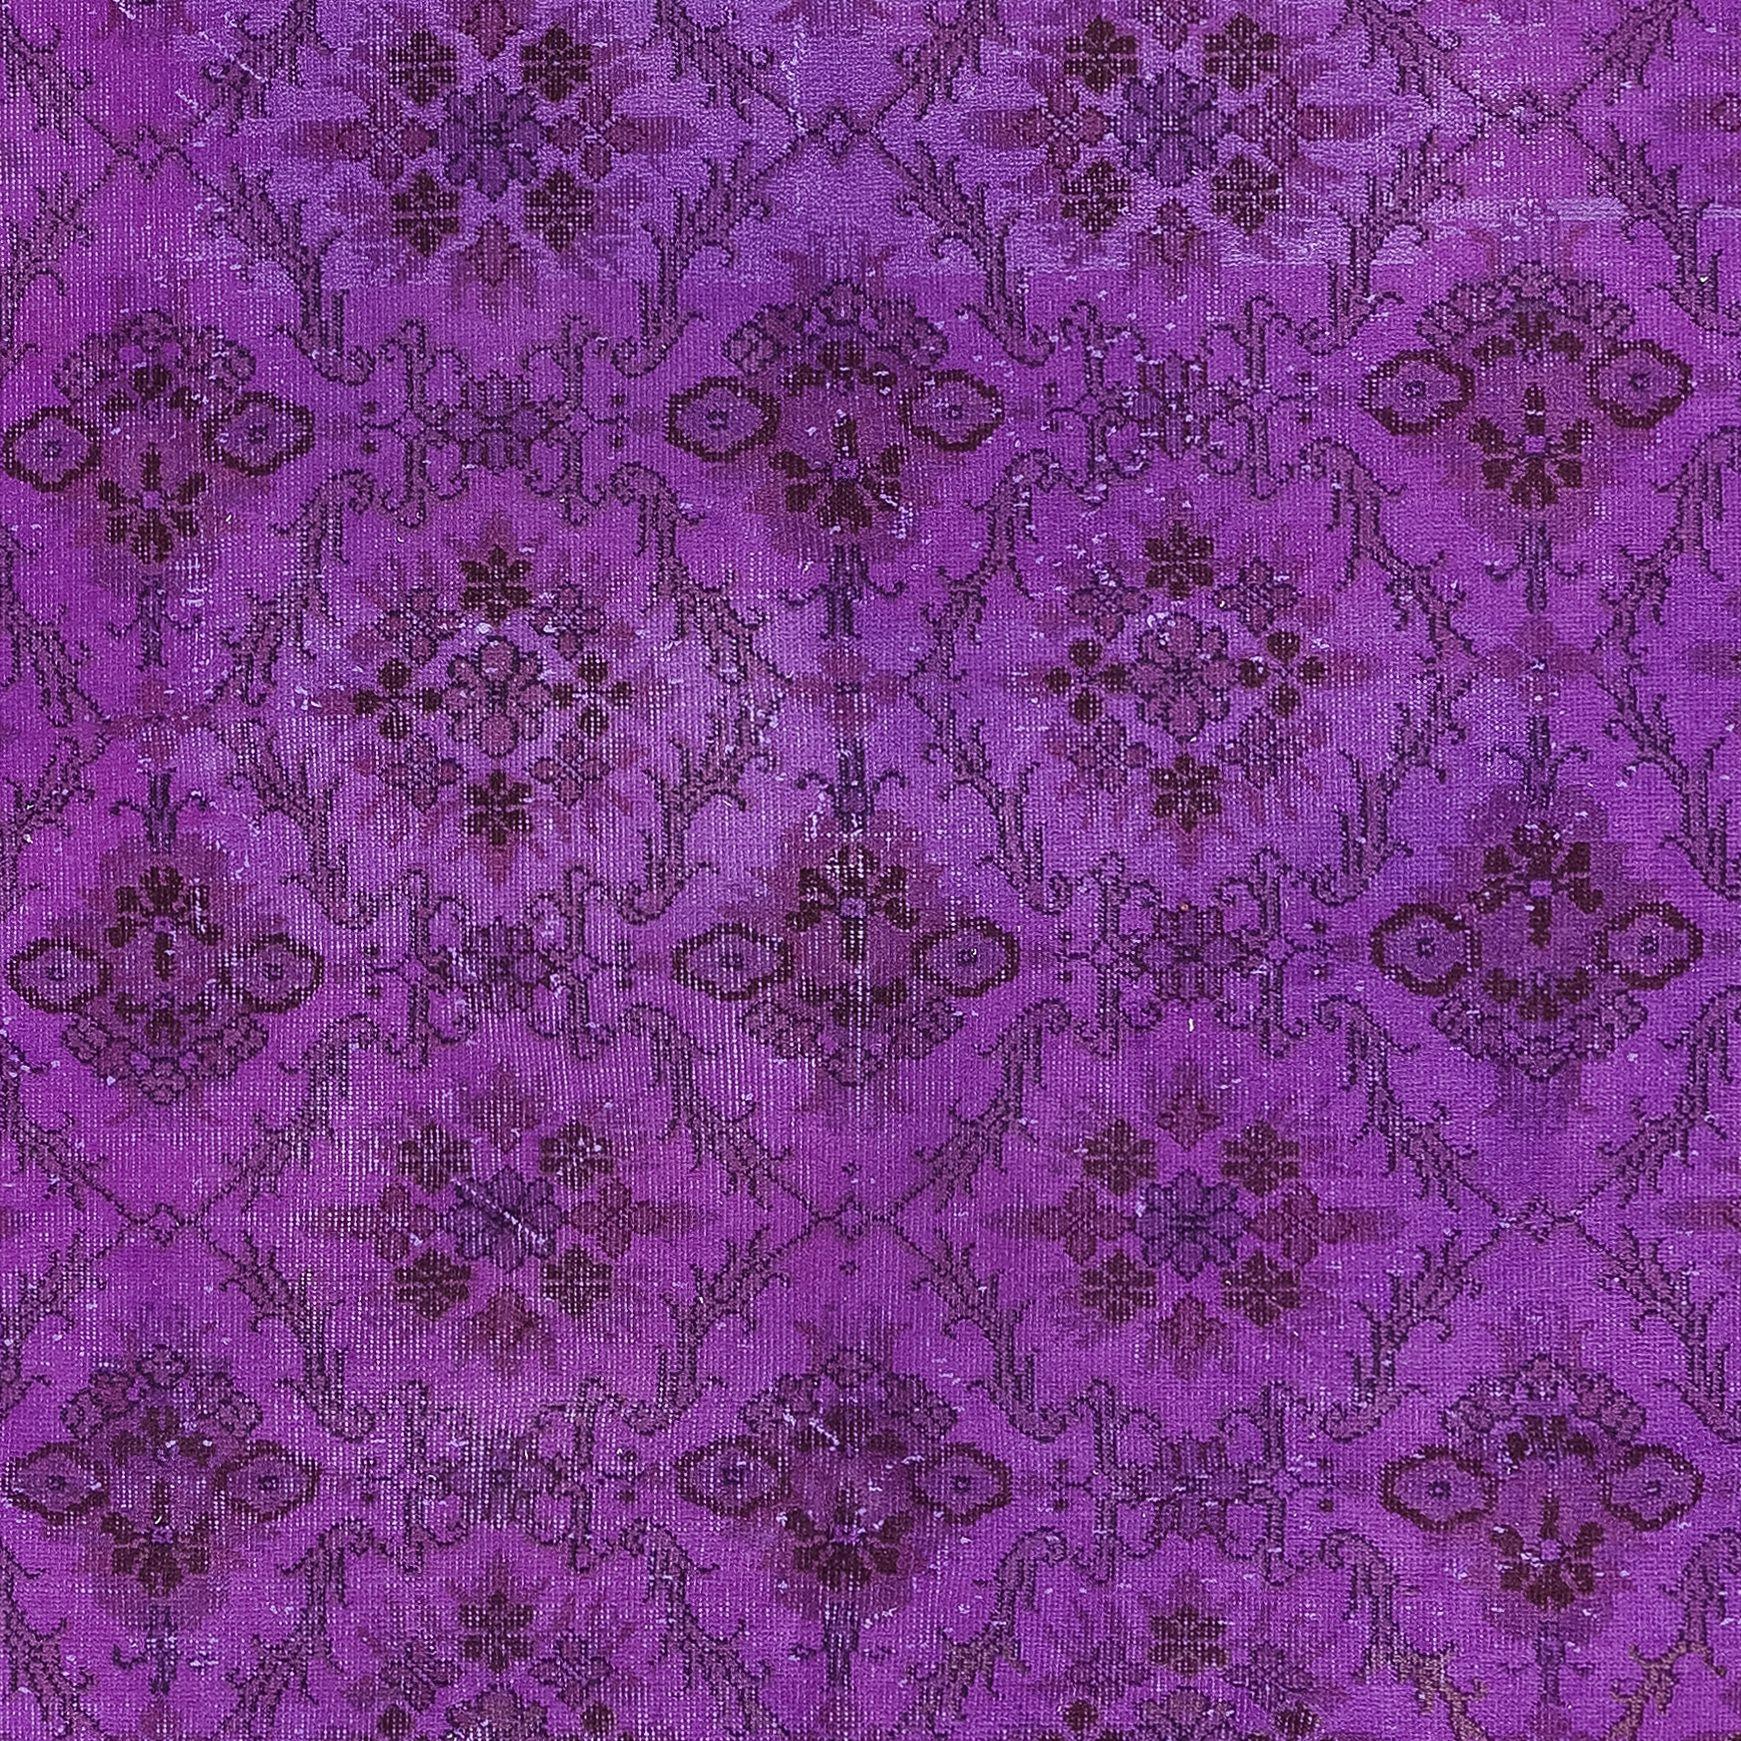 Modern 6.2x10 Ft Purple Contemporary Area Rug with Floral Design, Handknotted in Turkey For Sale